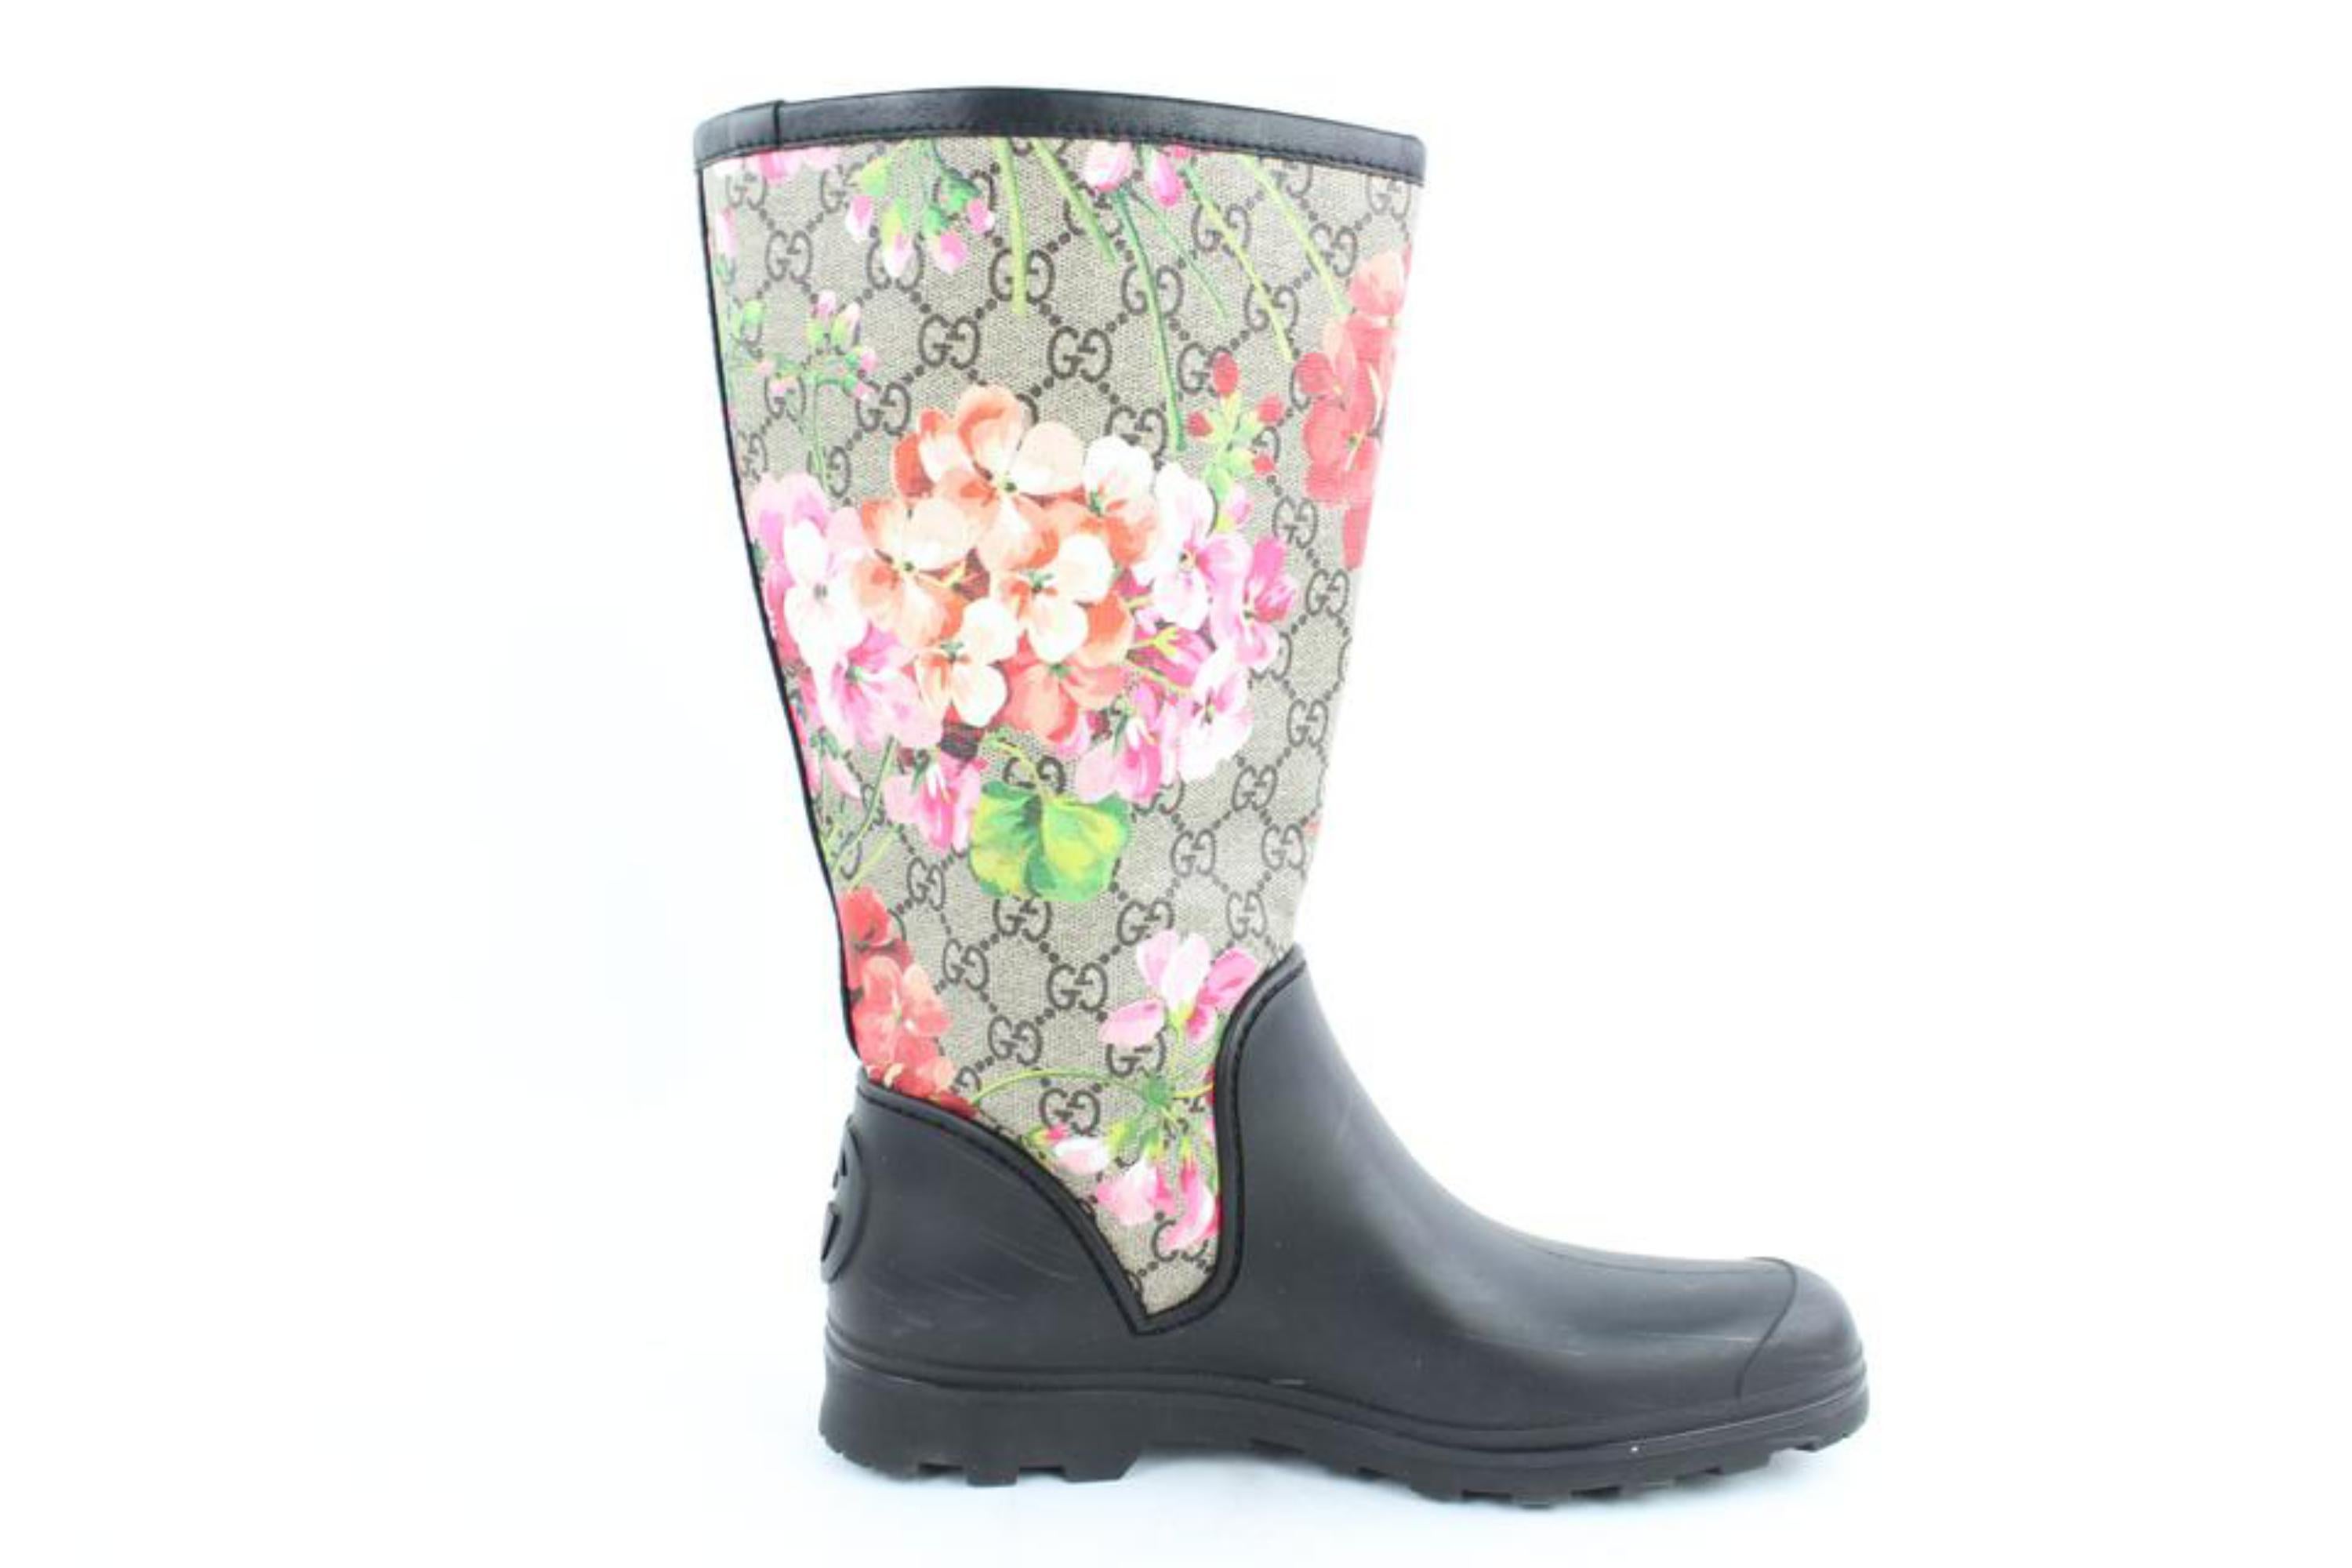 Gucci Black Limited Supreme Prato Gg Blooms Rain Boots/Booties 24684511 For Sale 4